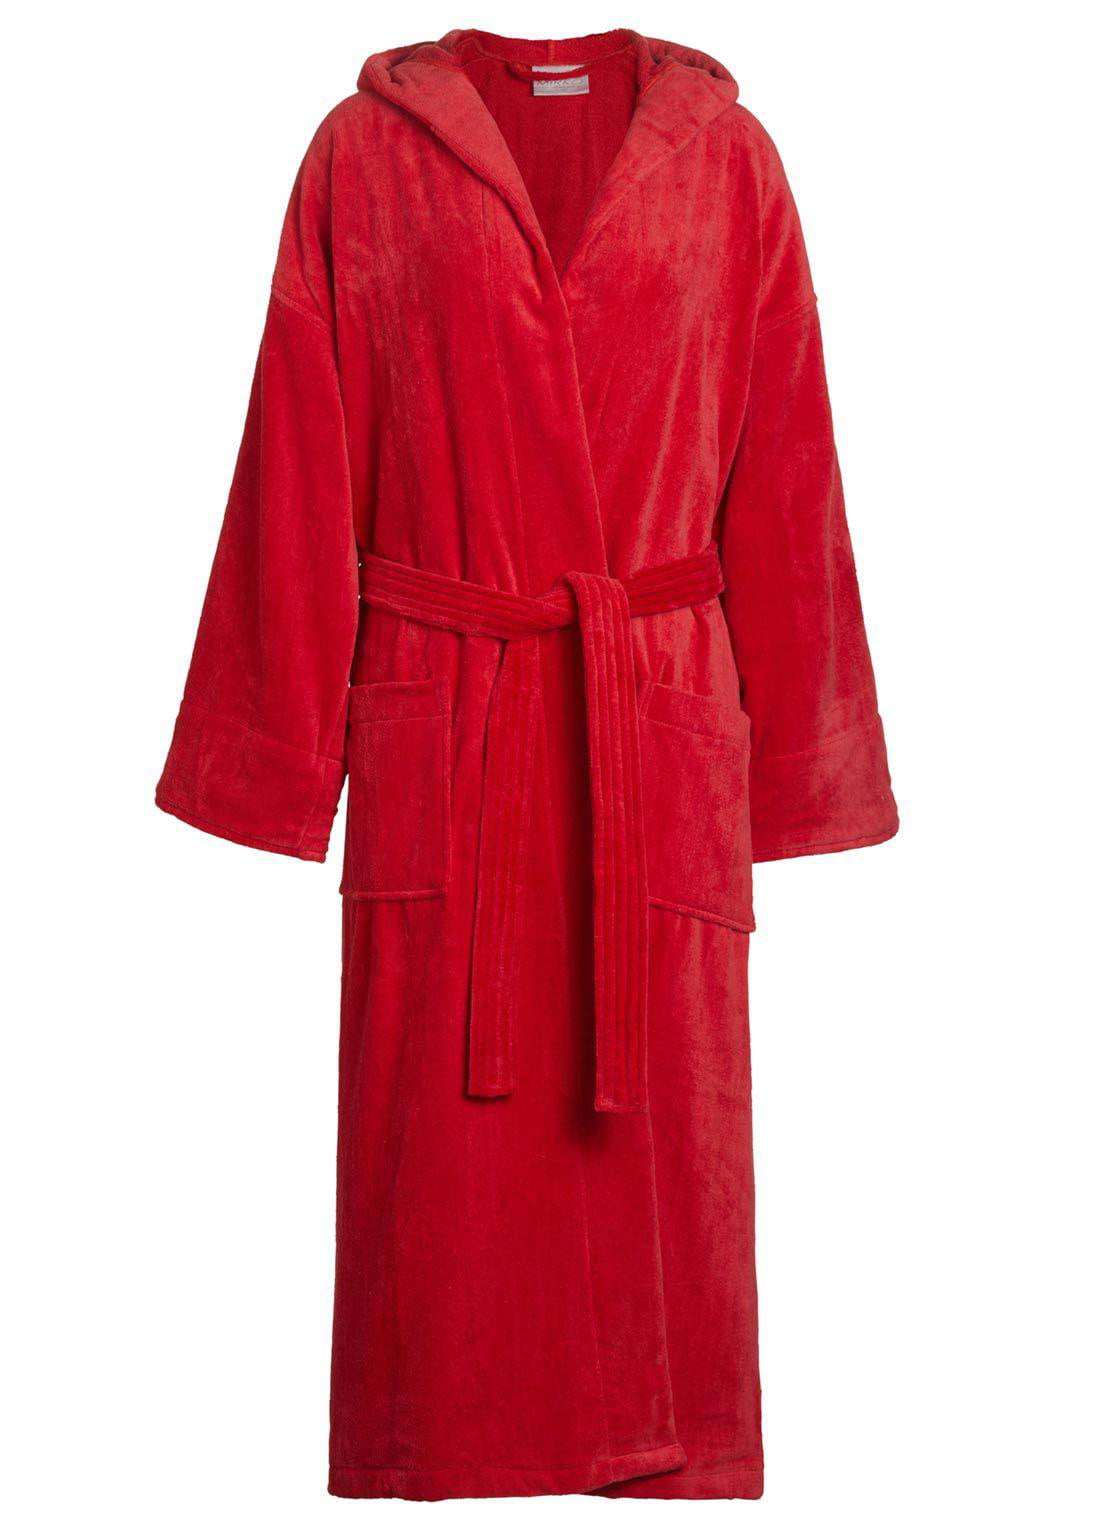 Spa and Resort Red 100% Cotton Terrycloth Bathrobe With Hood. Full ...